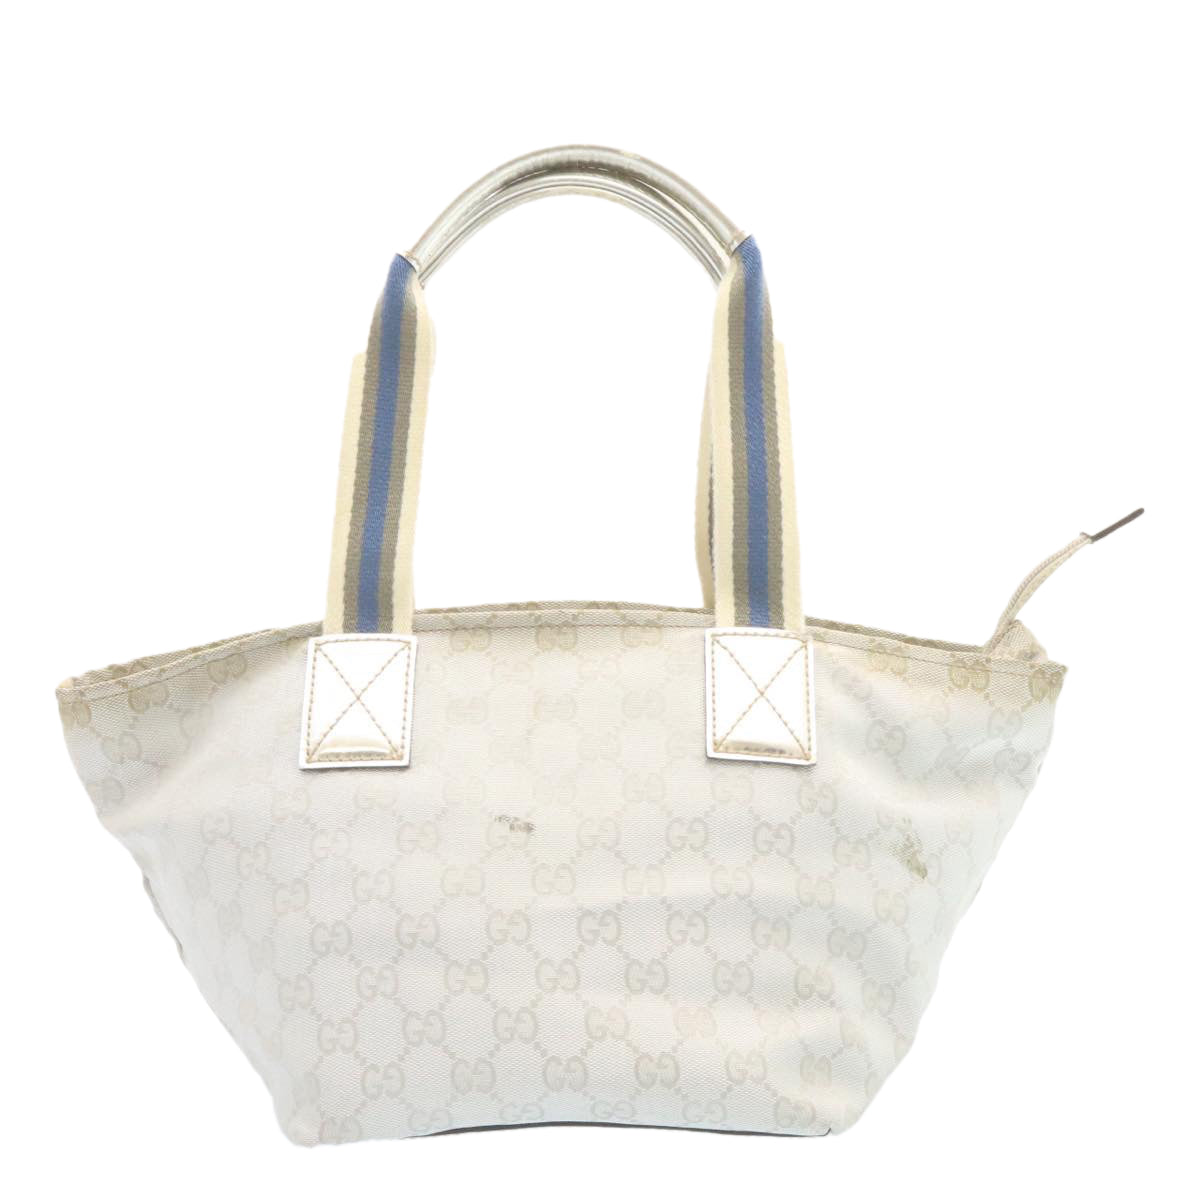 GUCCI Sherry Line GG Canvas Tote Bag Silver Blue Auth am1955g